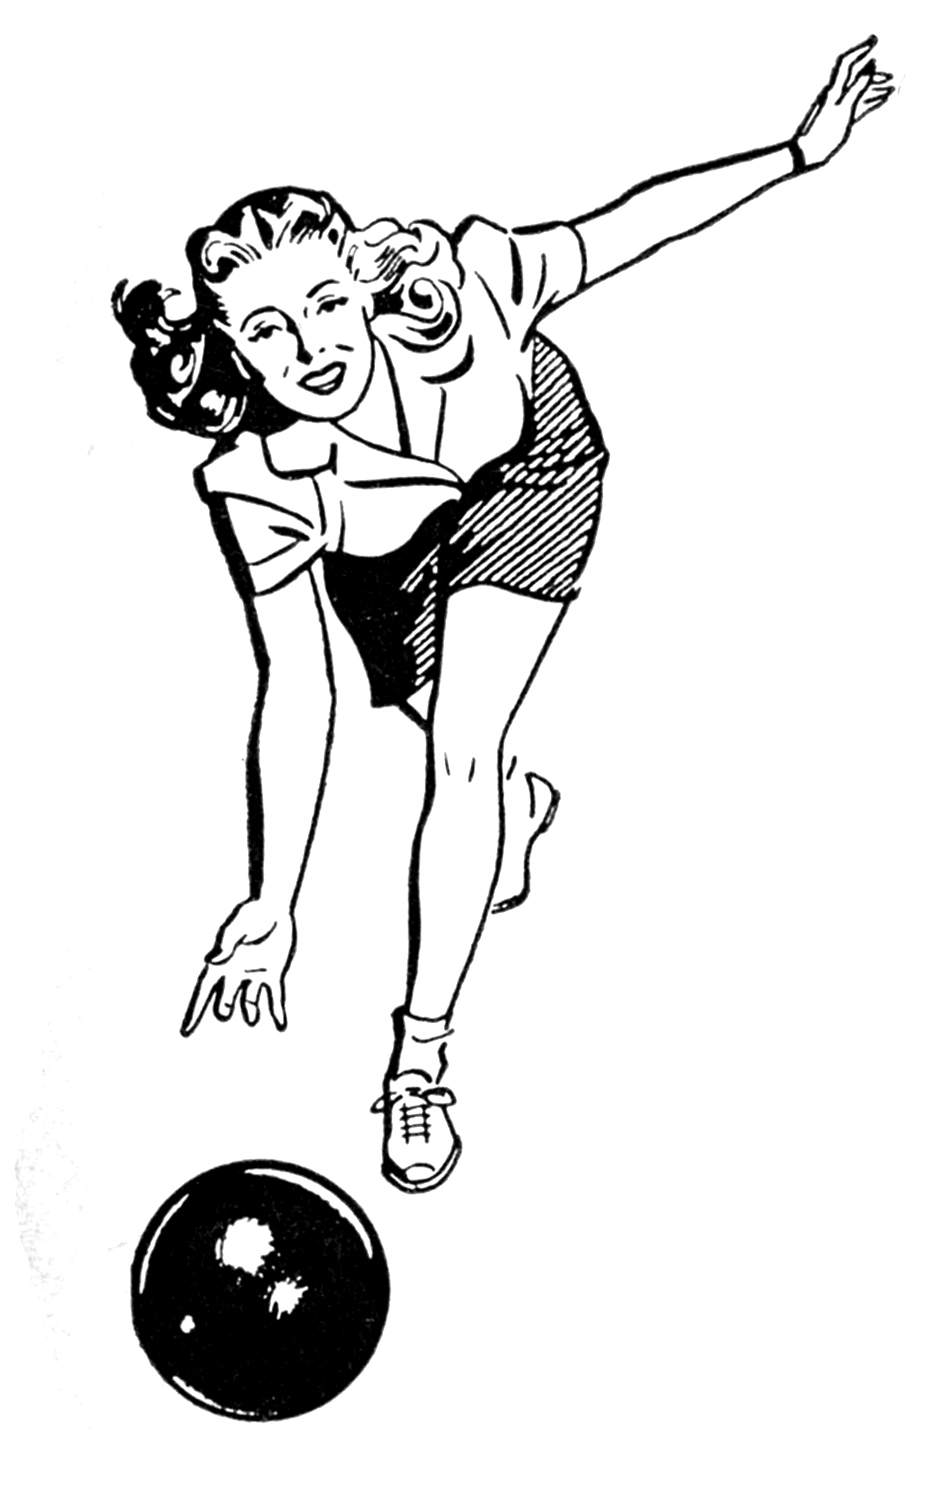 Retro Clip Art Woman and Man Bowling The Graphics Fairy